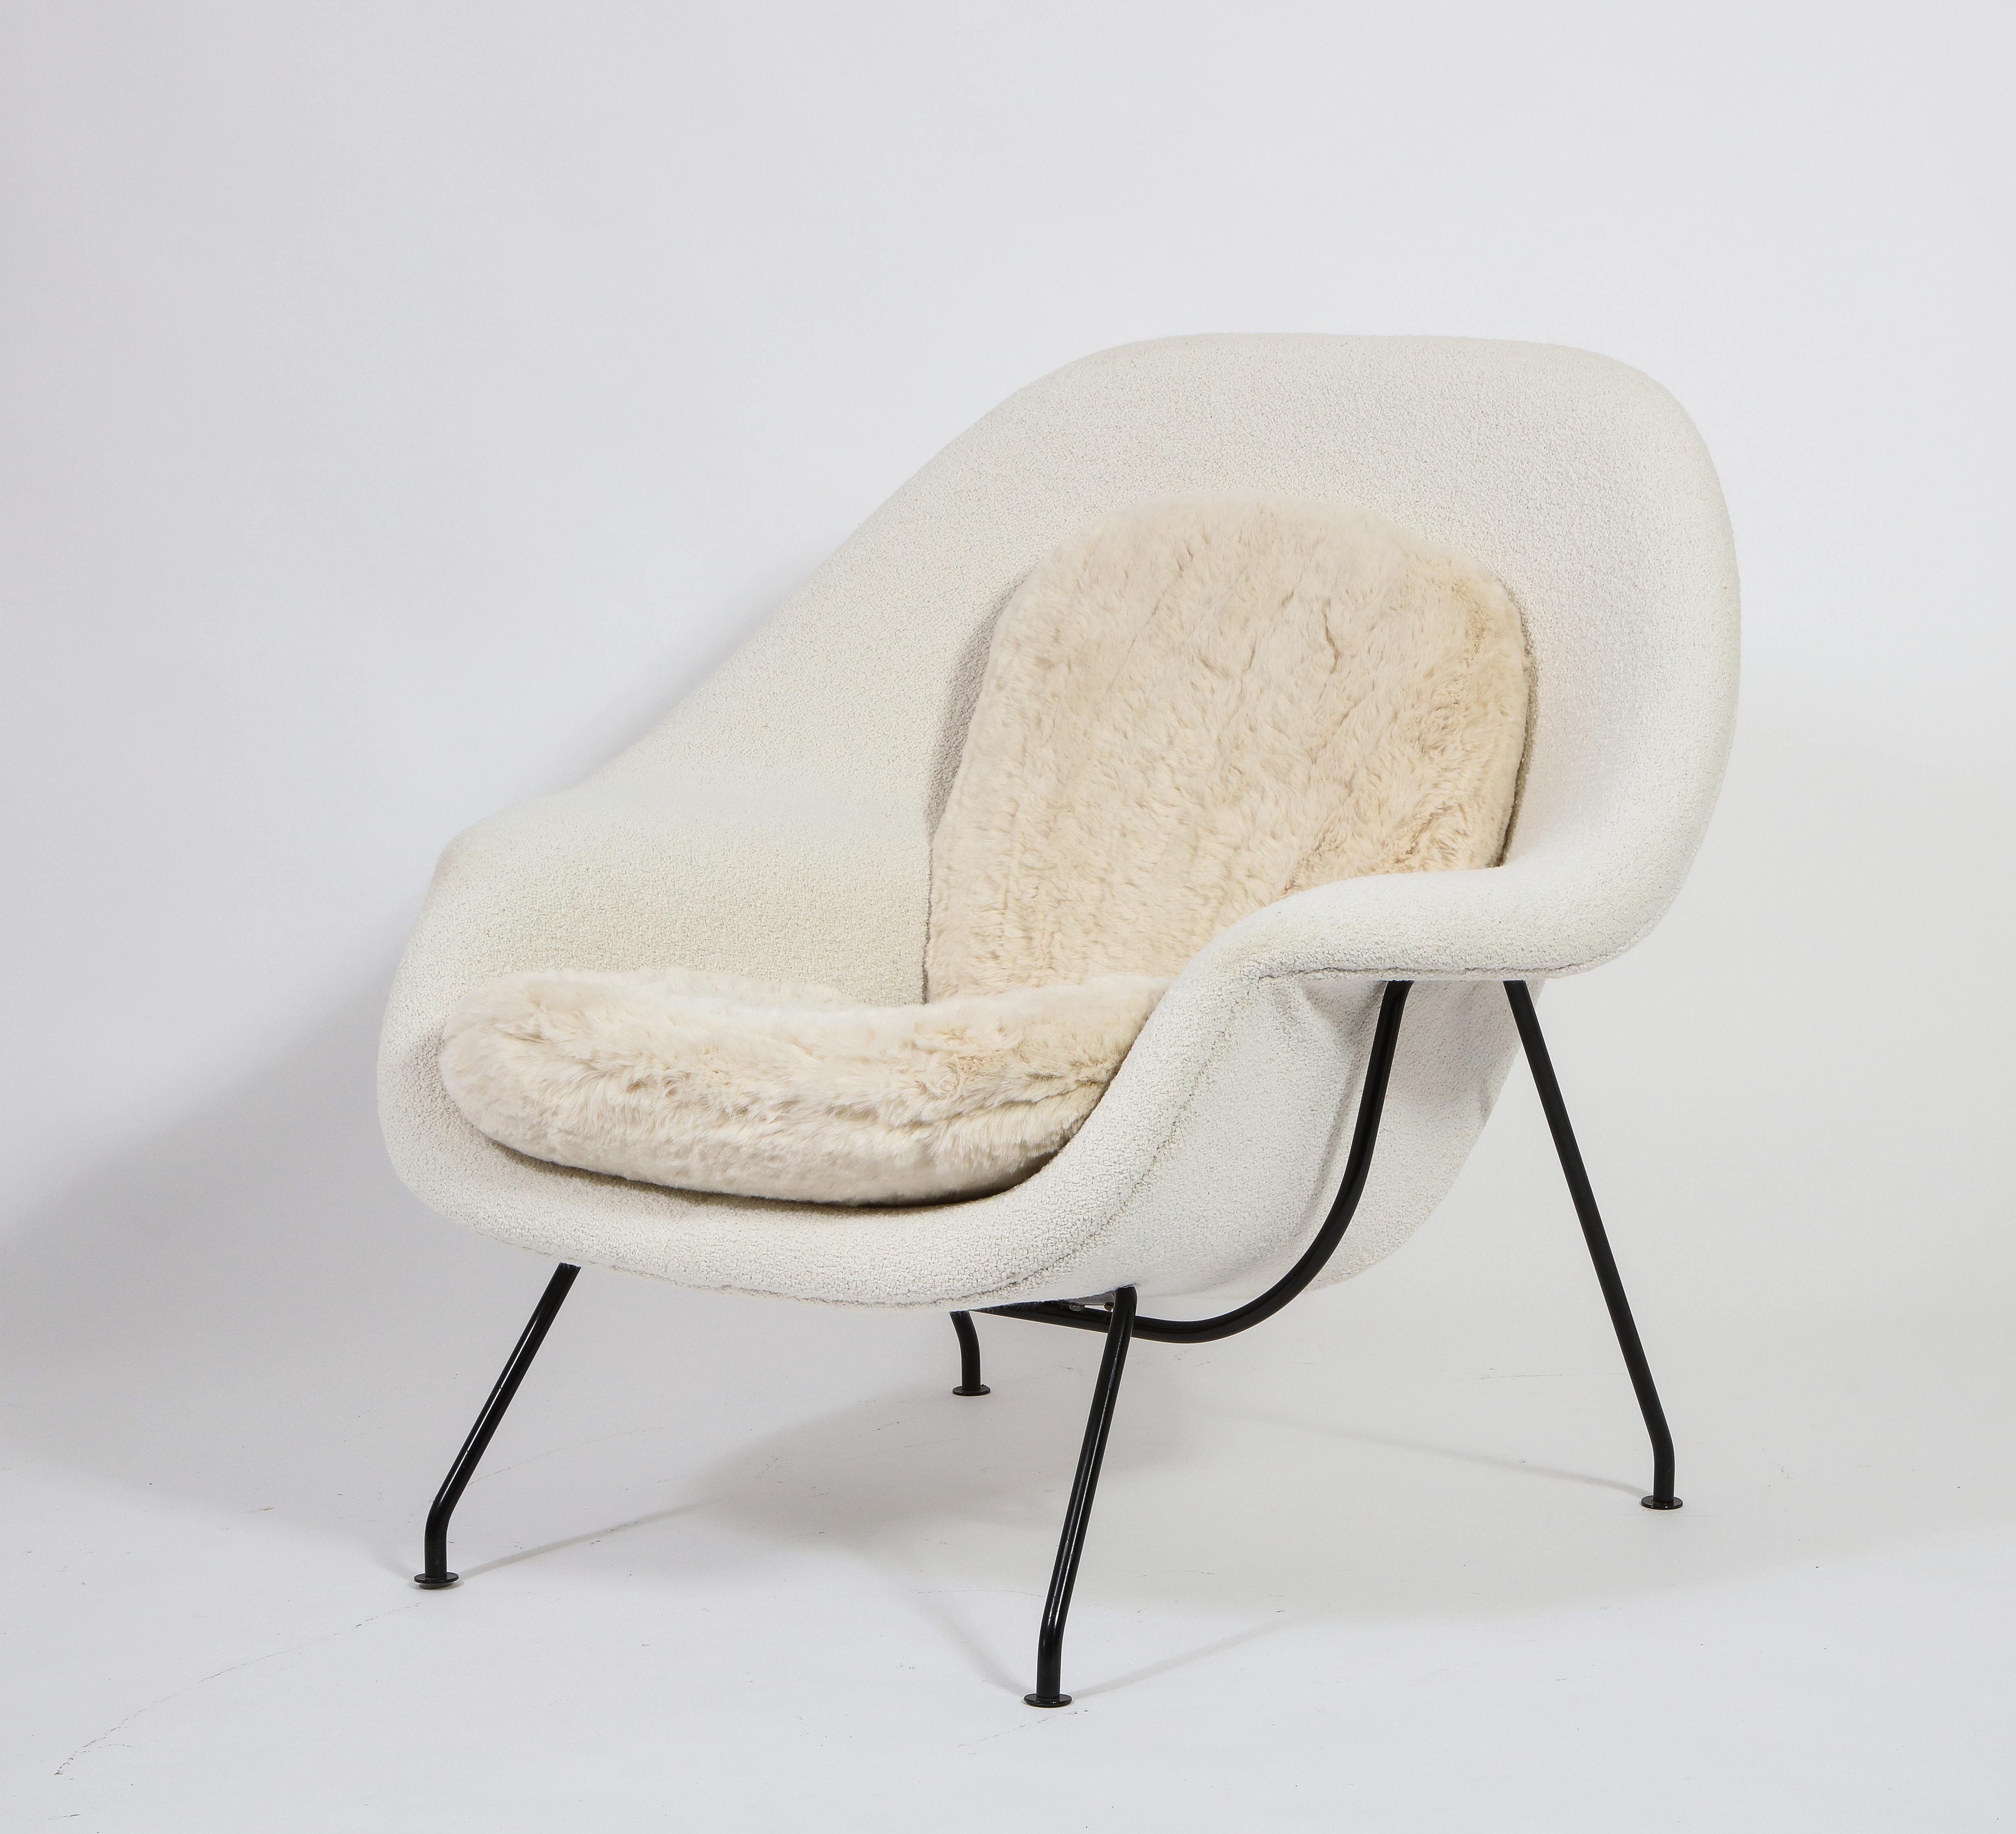 20th Century Eero Saarinen for Knoll Pair of Two-Tone Womb Chairs with Ottomans, USA 1955 For Sale